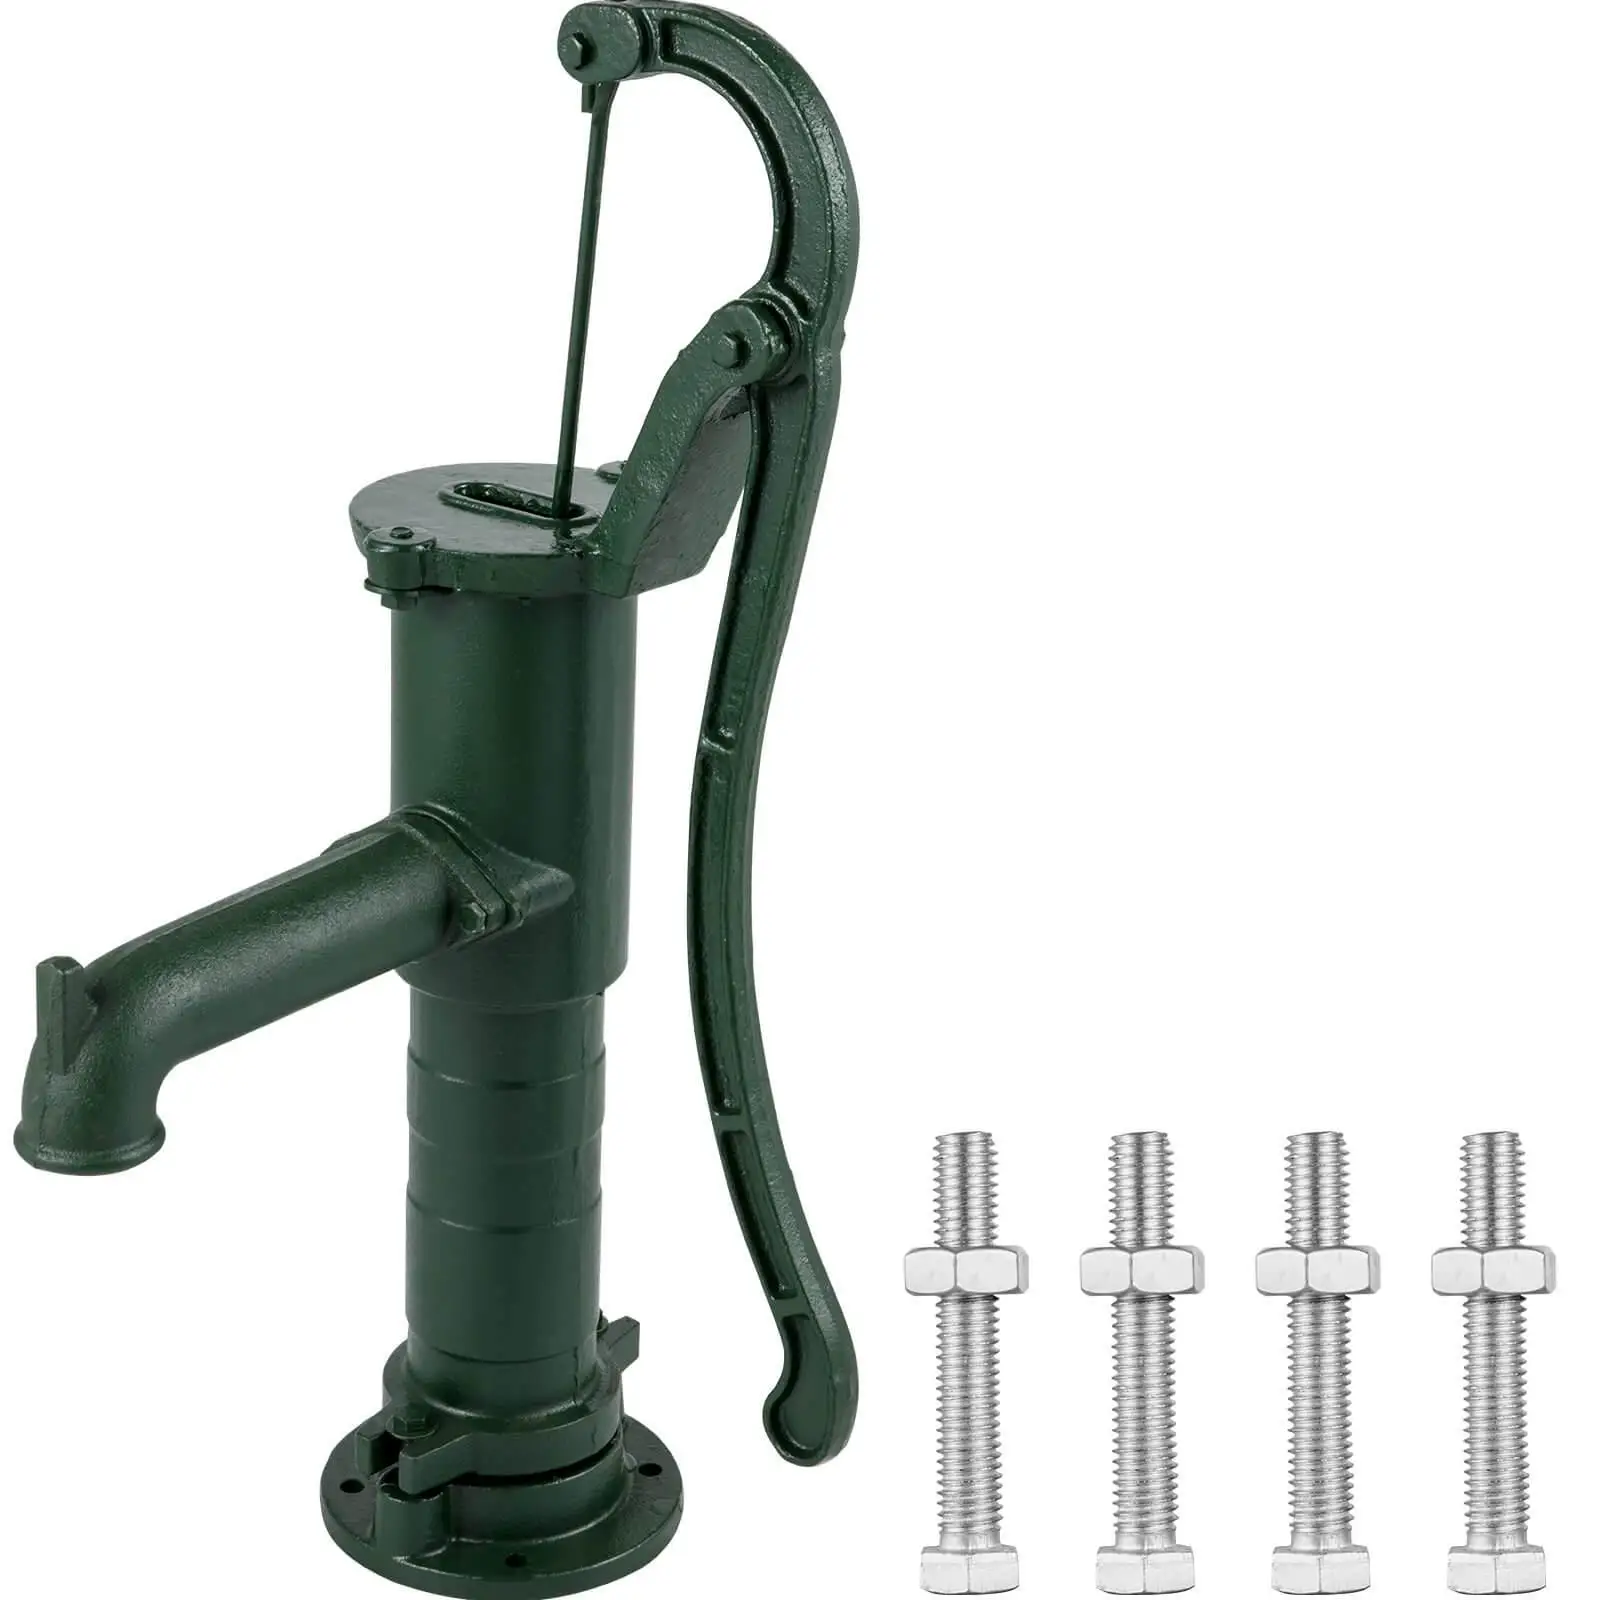 Learn DIY Installation of Hand Pumps by Using These Simple Tips - VEVOR Blog